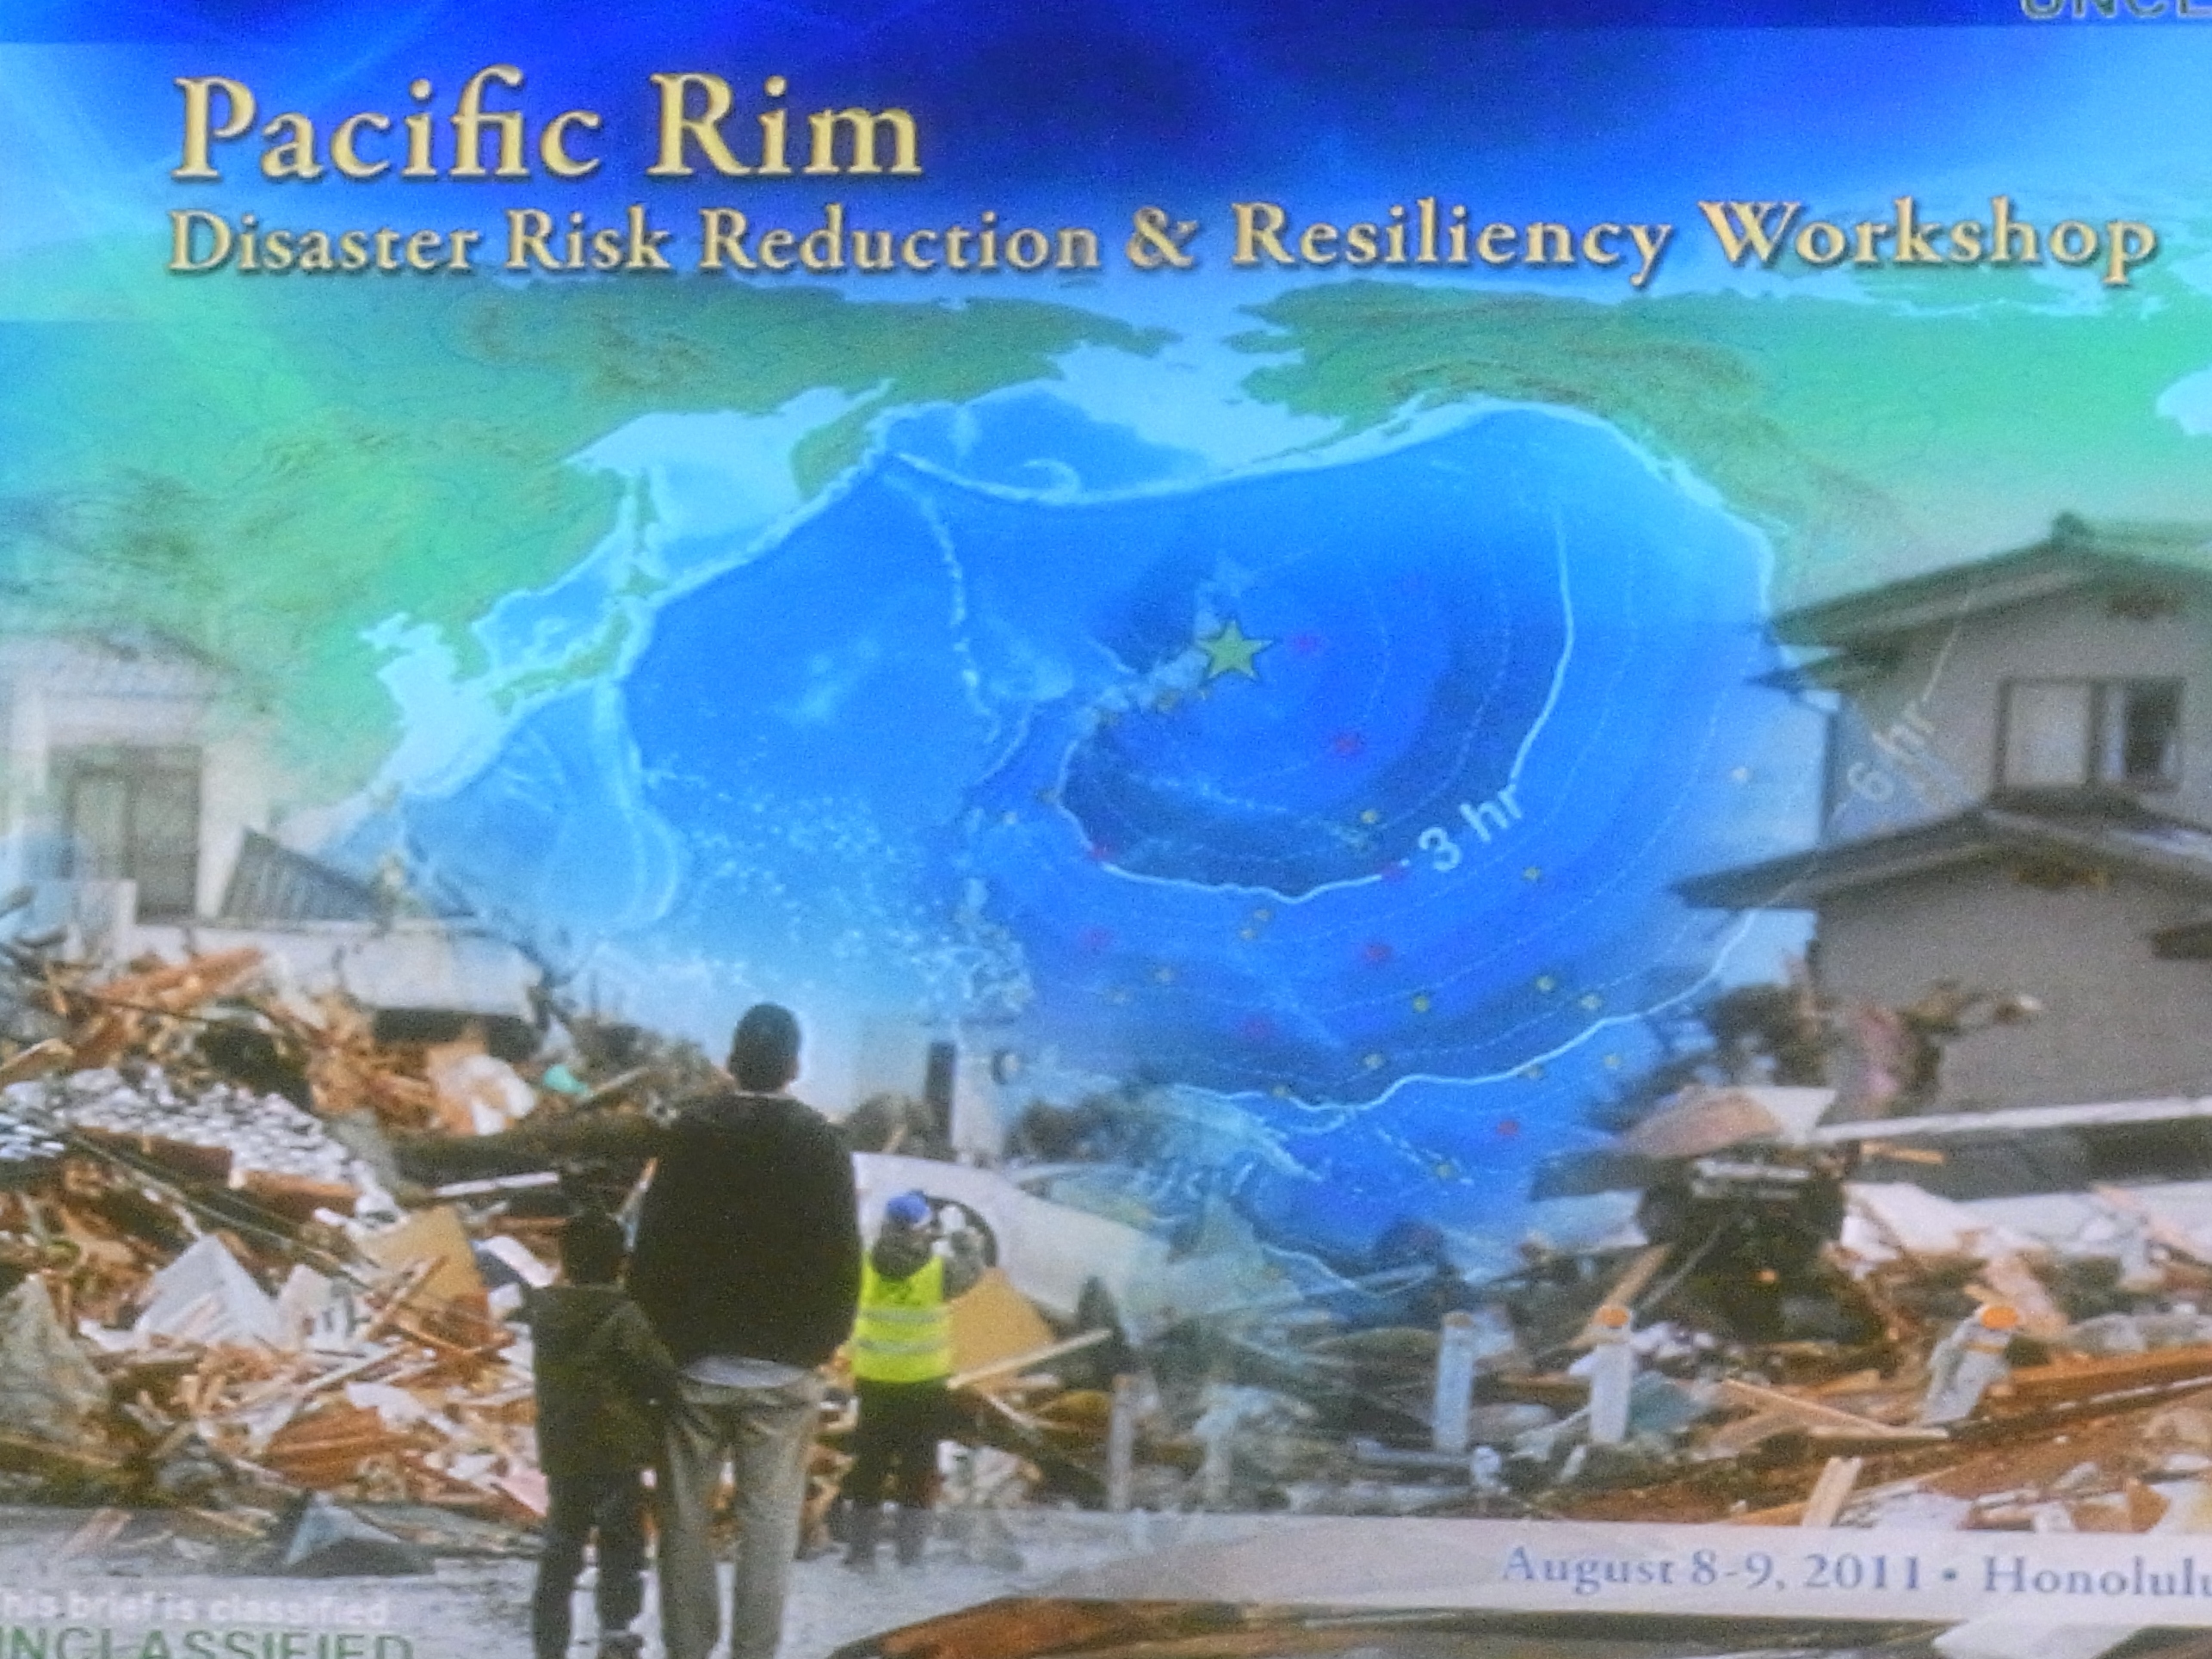 Pacific Rim Disaster Risk Reduction & Resiliency Workshop